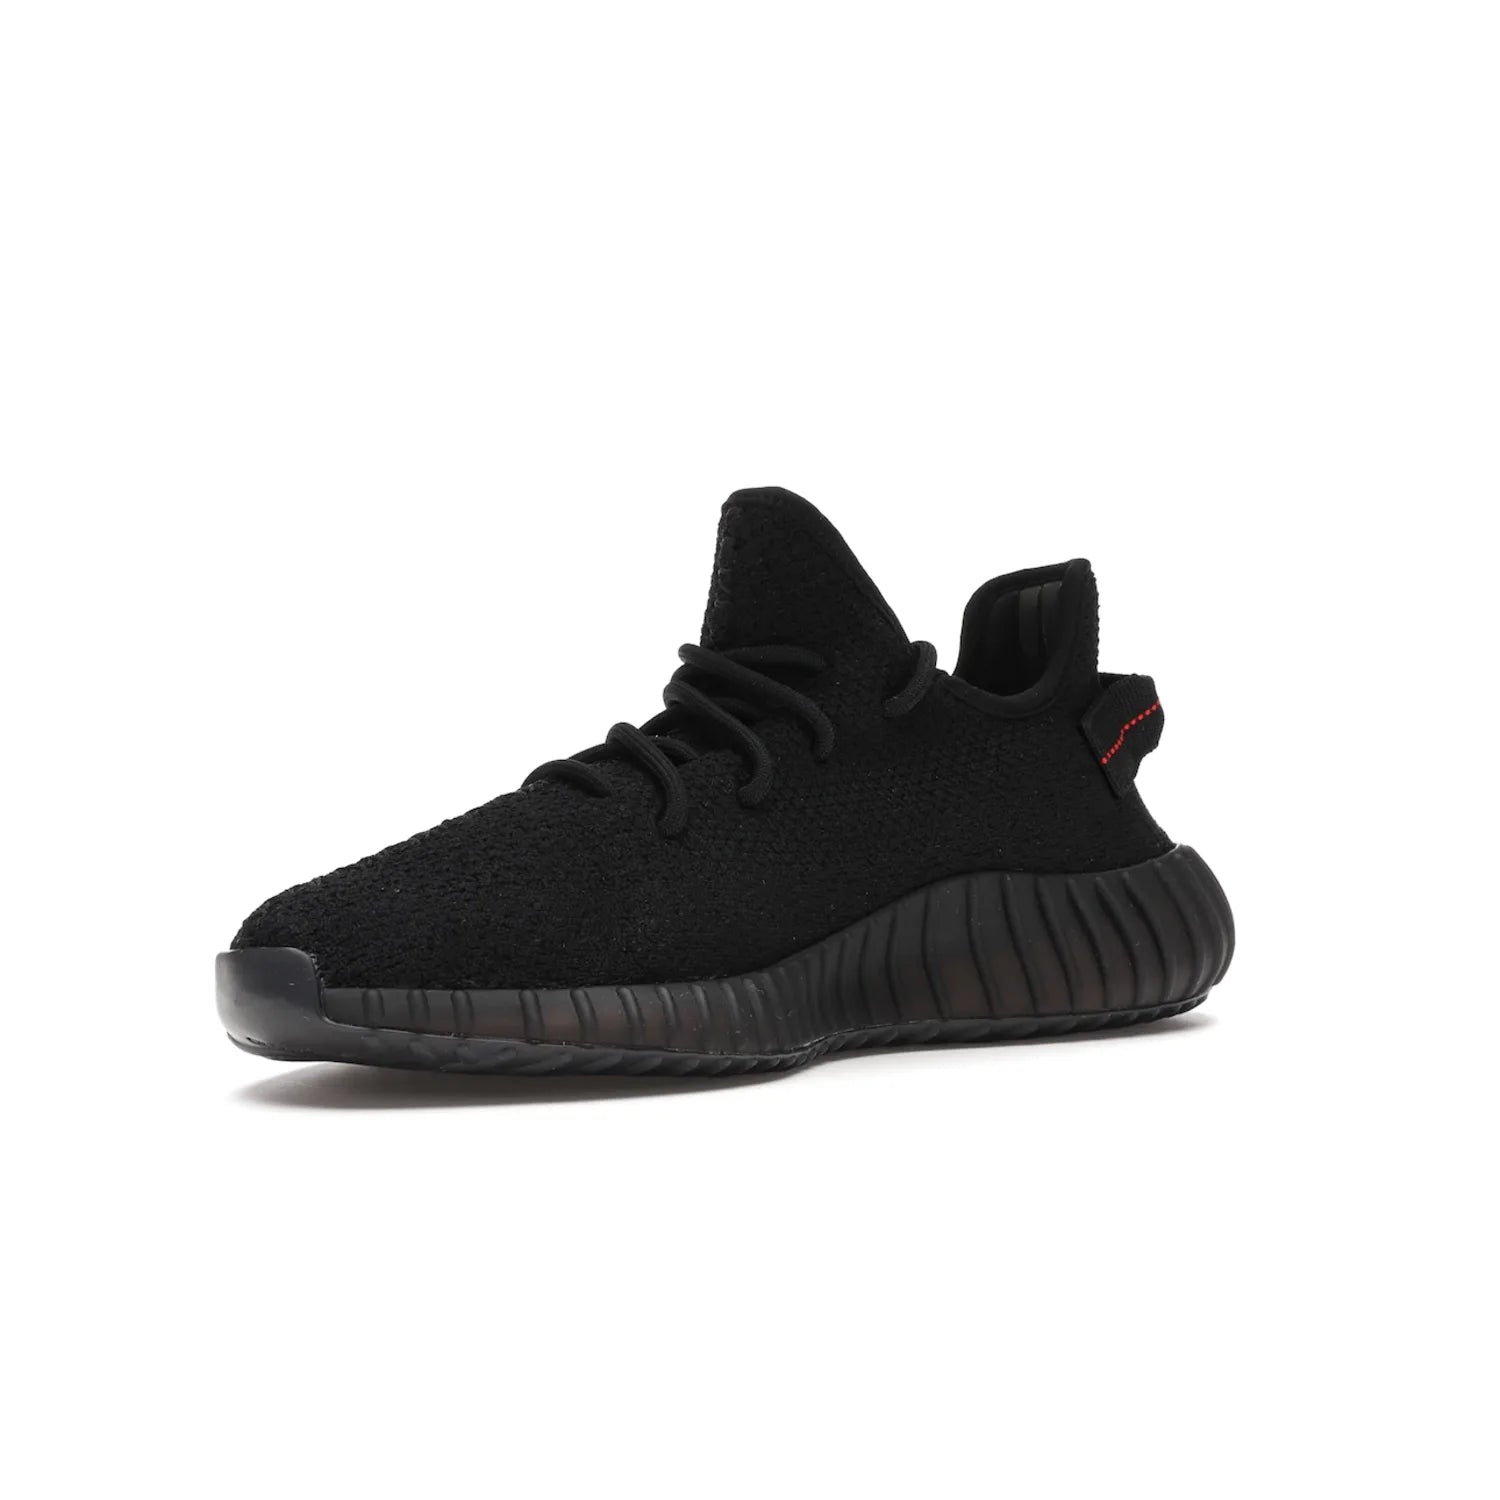 adidas Yeezy Boost 350 V2 Black Red (2017/2020) - Image 15 - Only at www.BallersClubKickz.com - Adidas Yeezy Boost 350 V2 Black Red: a classic colorway featuring black Primeknit upper, BOOST cushioning system, and iconic "SPLY-350" text. Released in 2017 for a retail price of $220.